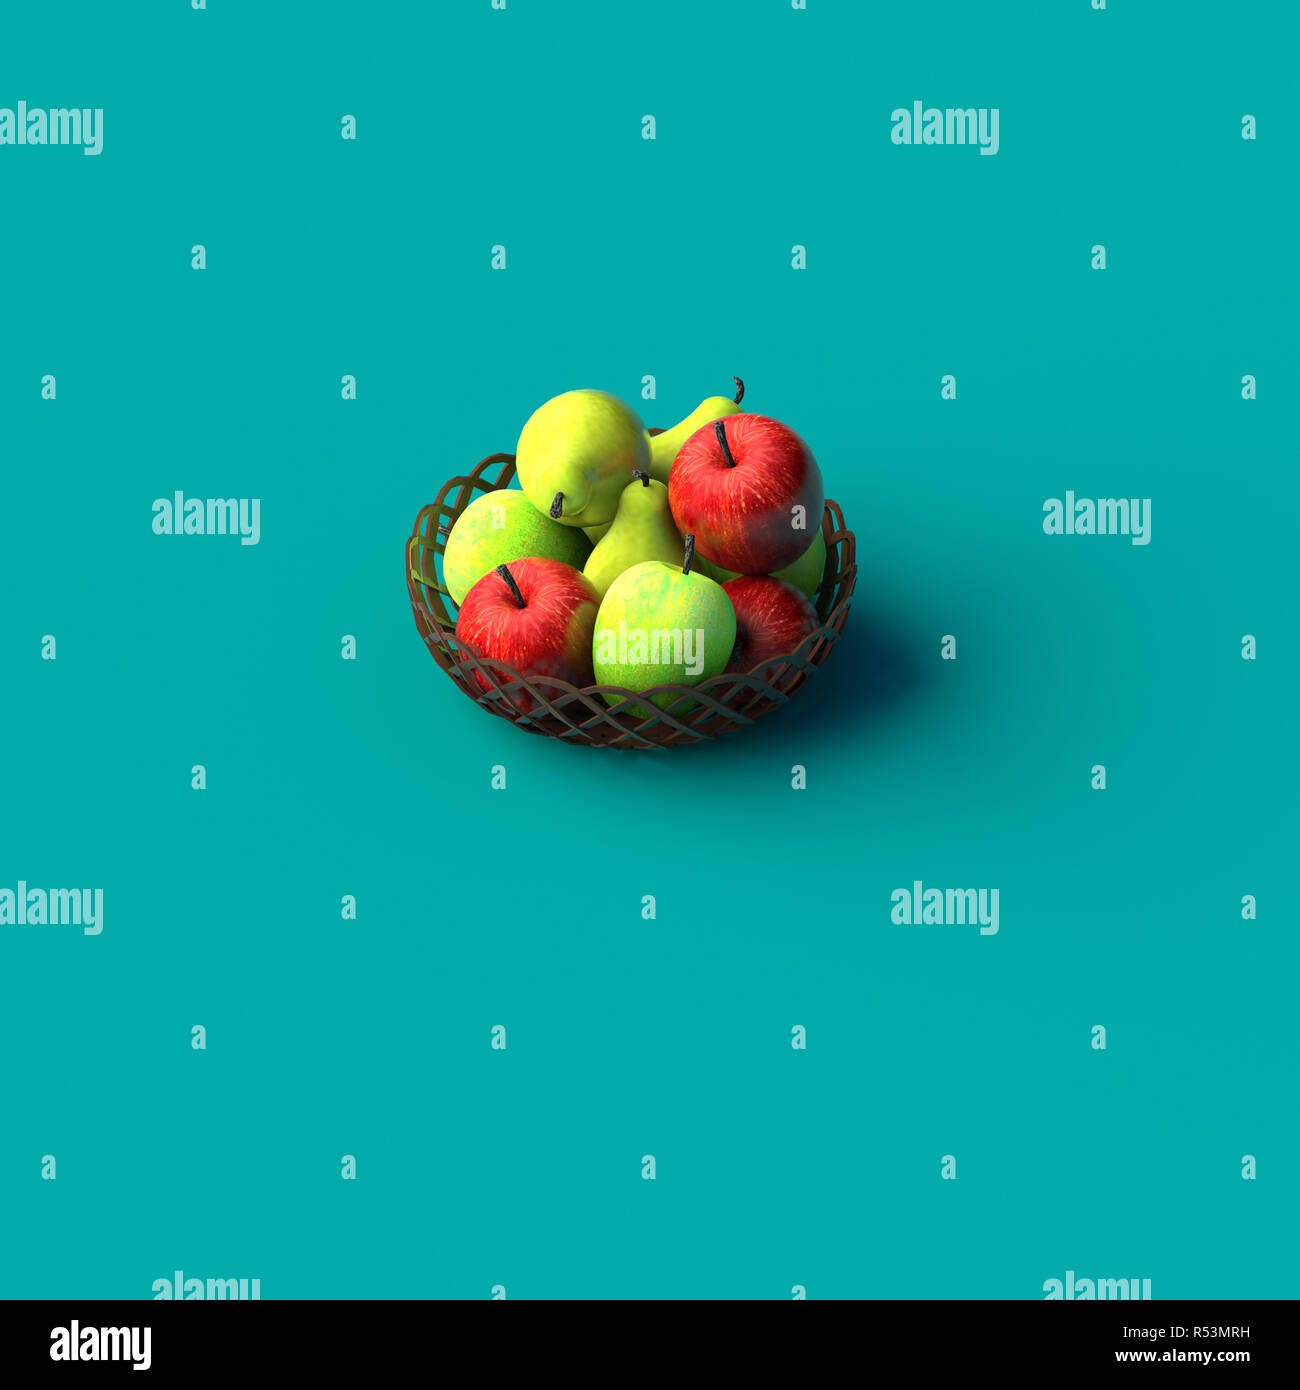 https://c8.alamy.com/comp/R53MRH/3d-rendering-of-red-apples-and-green-pears-in-basket-R53MRH.jpg